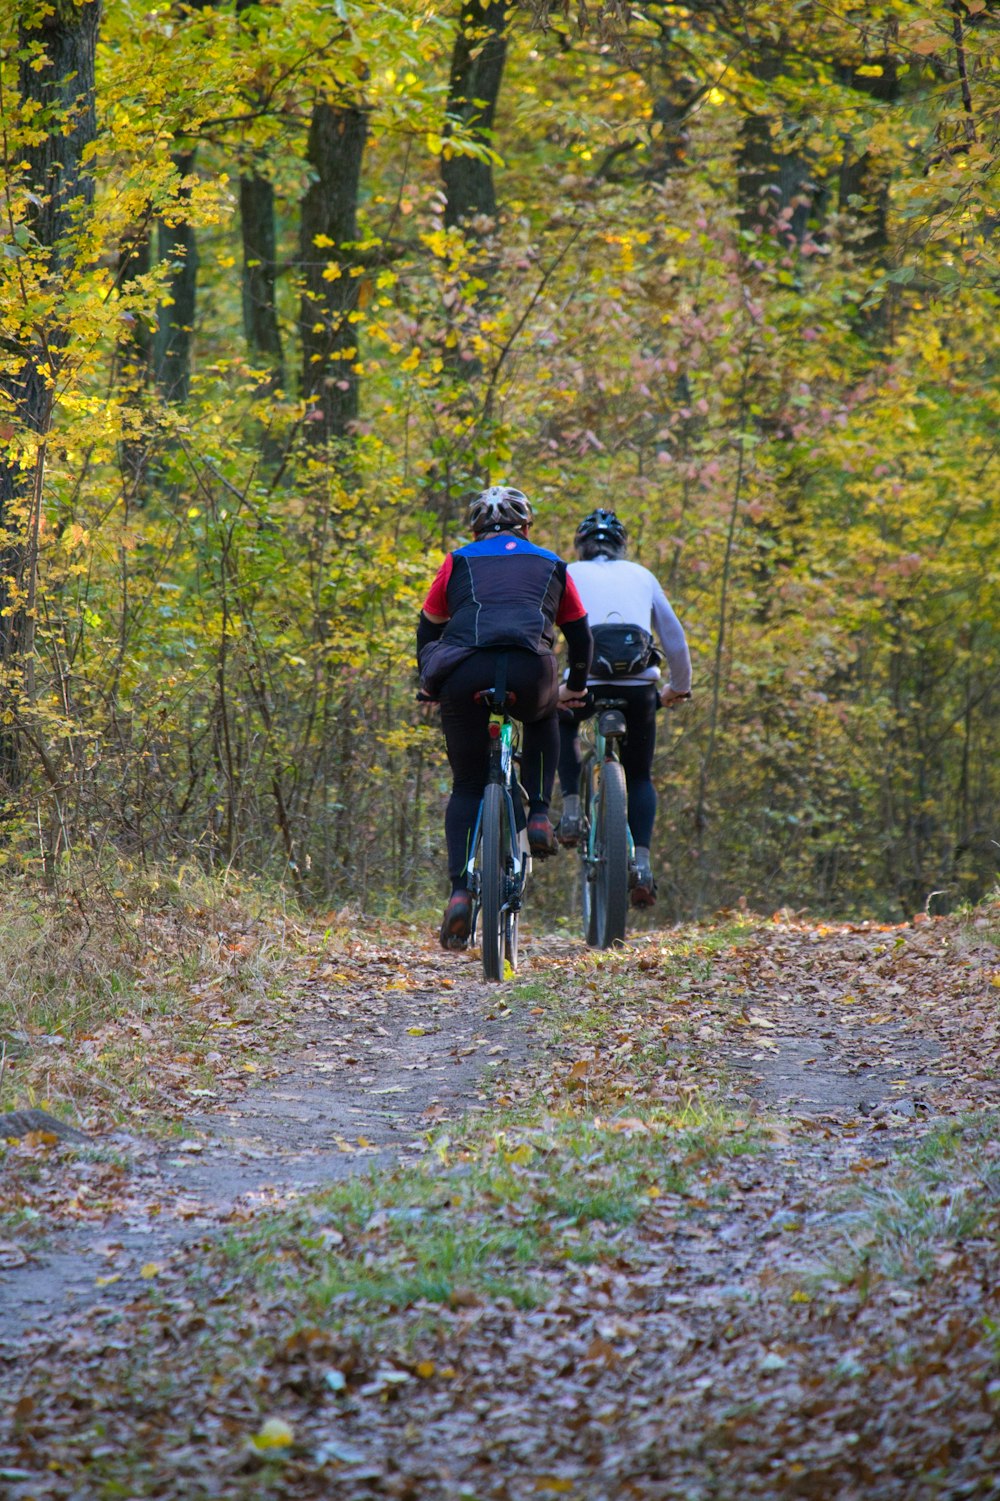 a couple of people riding bikes down a dirt road